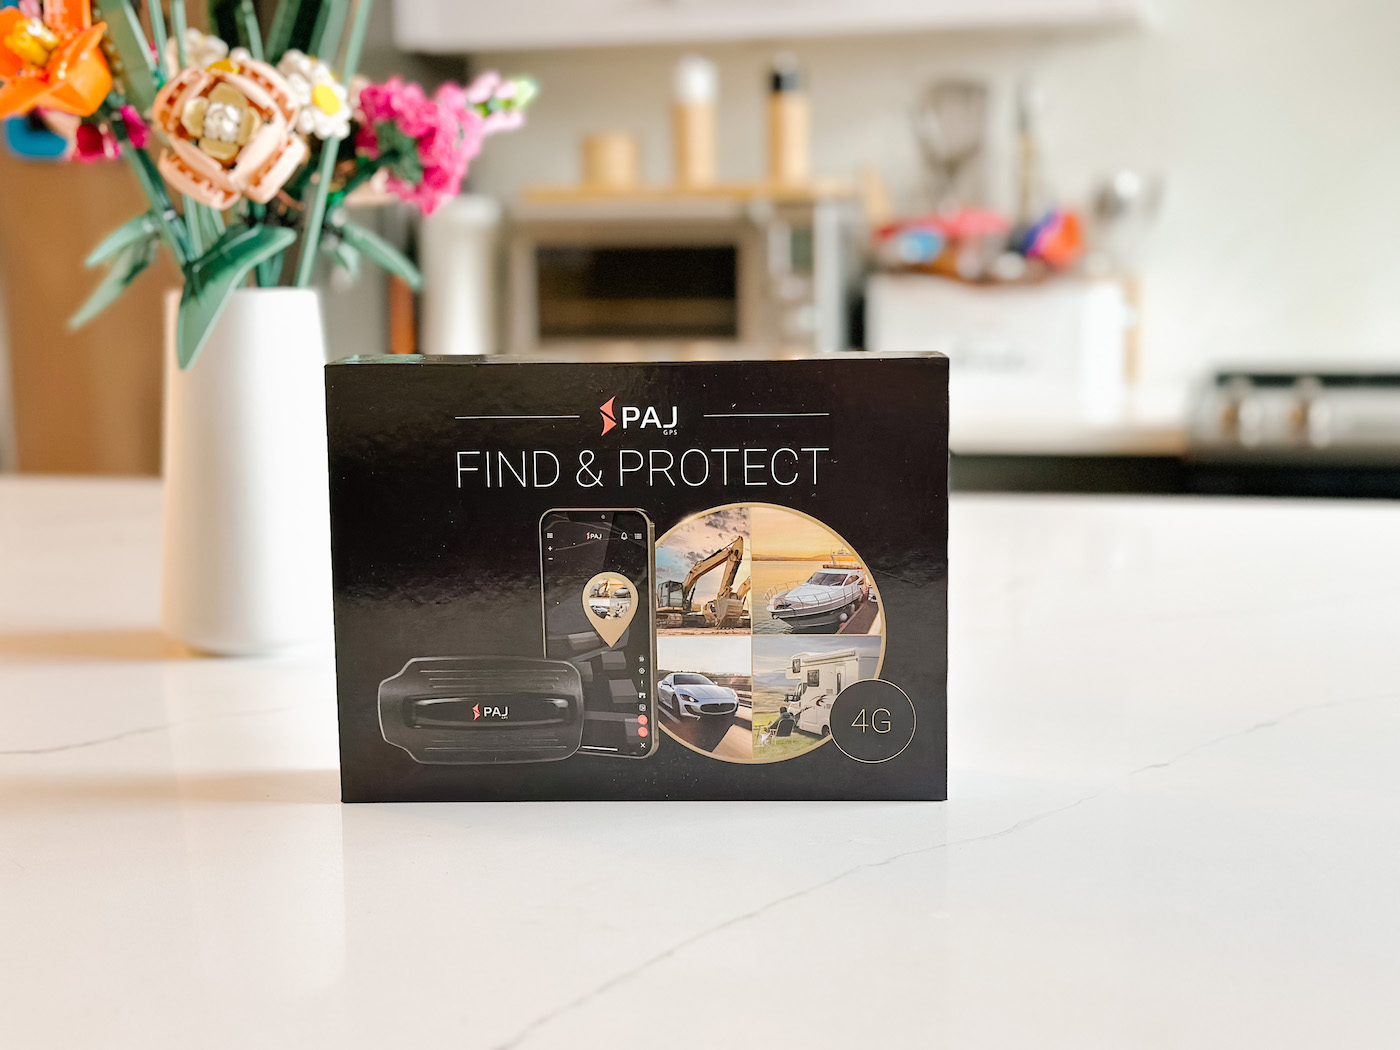 PAJ GPS Easy Finder 4G Review 